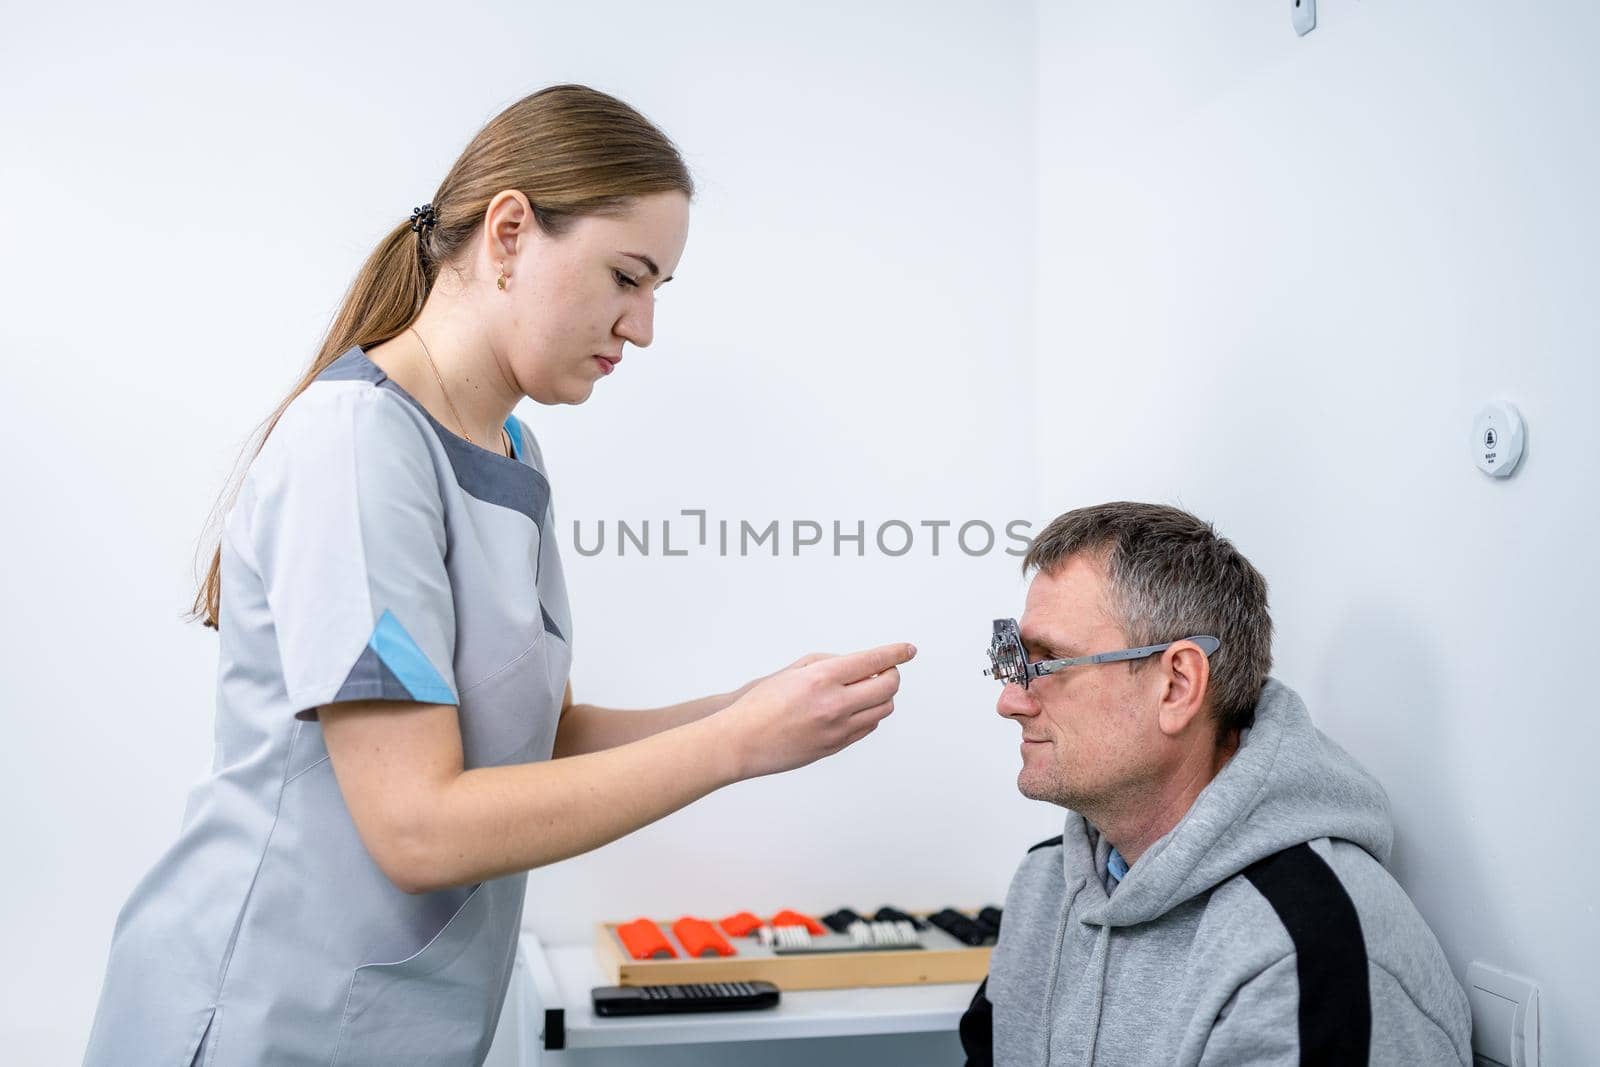 Examining patient vision. Eye exam. Optometrist checking patient eyesight and vision correction. Patient undergoing vision check with special ophthalmic glasses at eye clinic. Selection of eyeglasses.